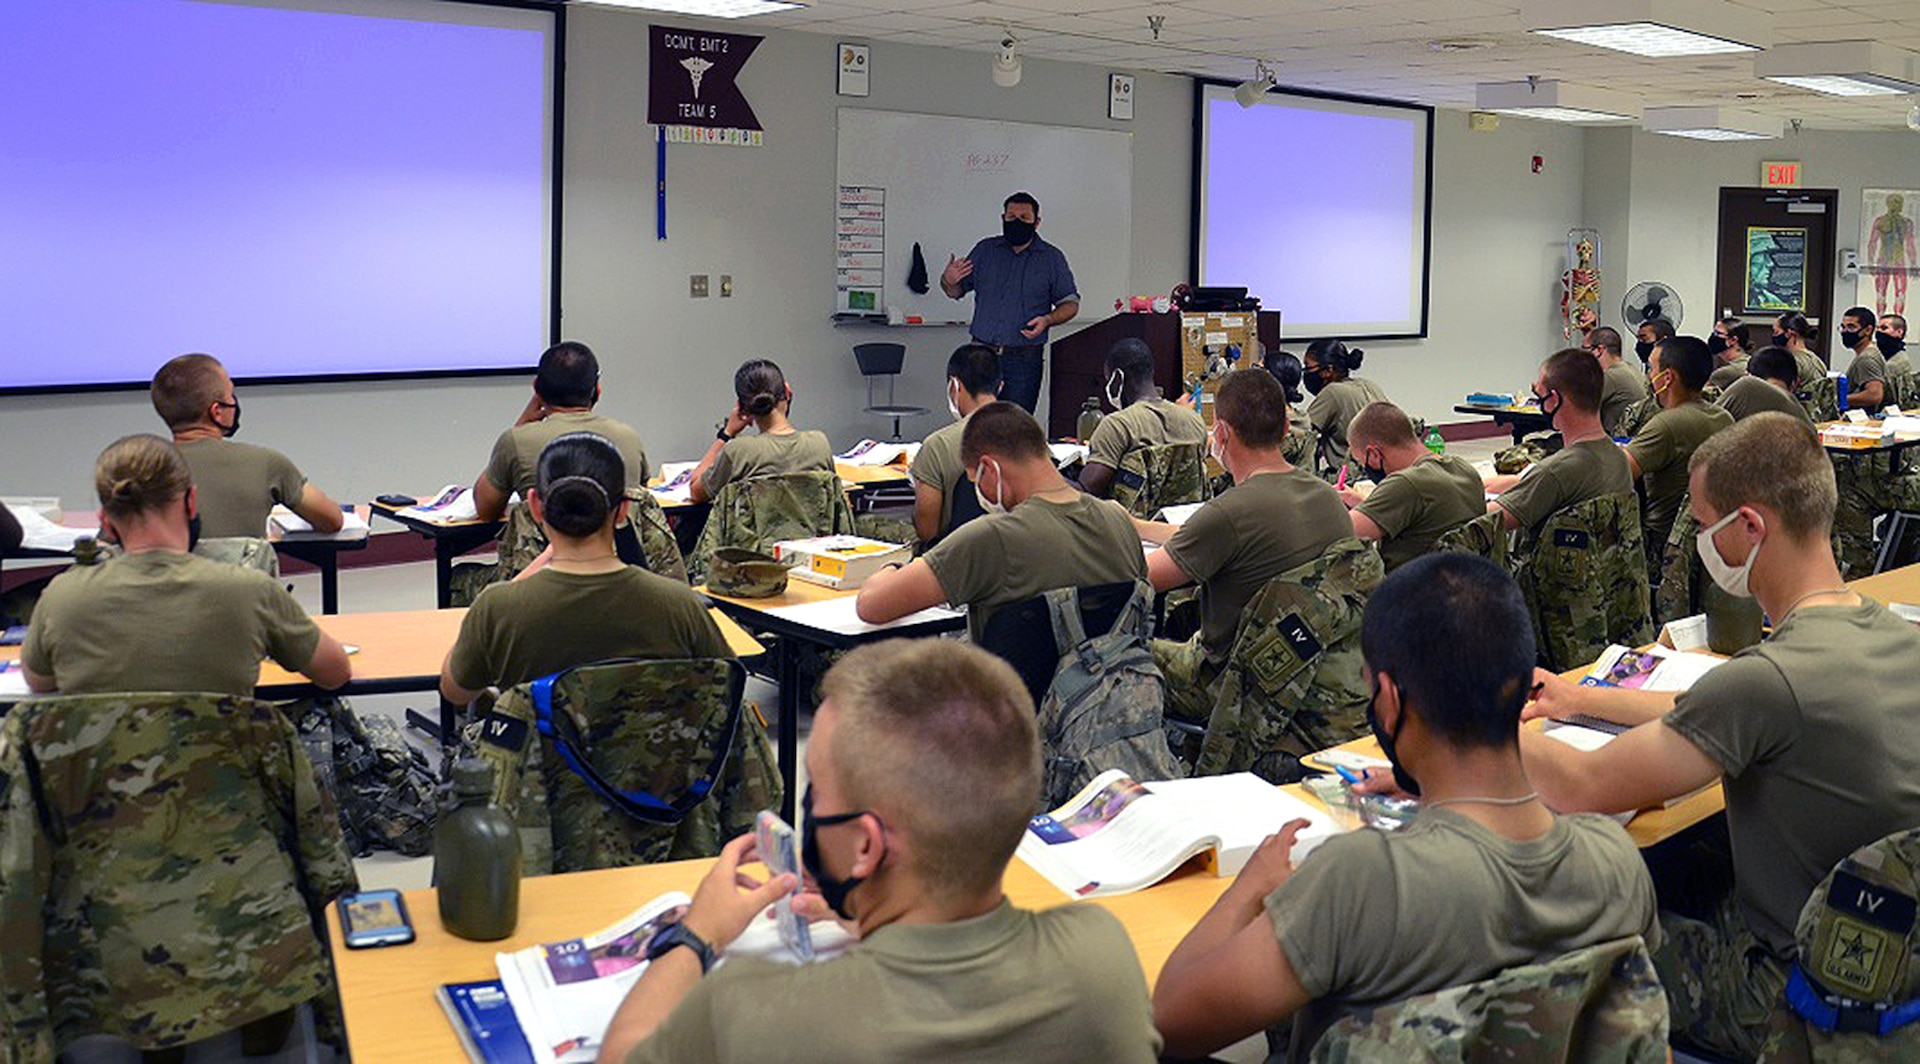 James Stilley, a civilian emergency medical technician instructor in the Combat Medic Specialist Training Program, or CMSTP, lectures students assigned to the second training shift of the day.